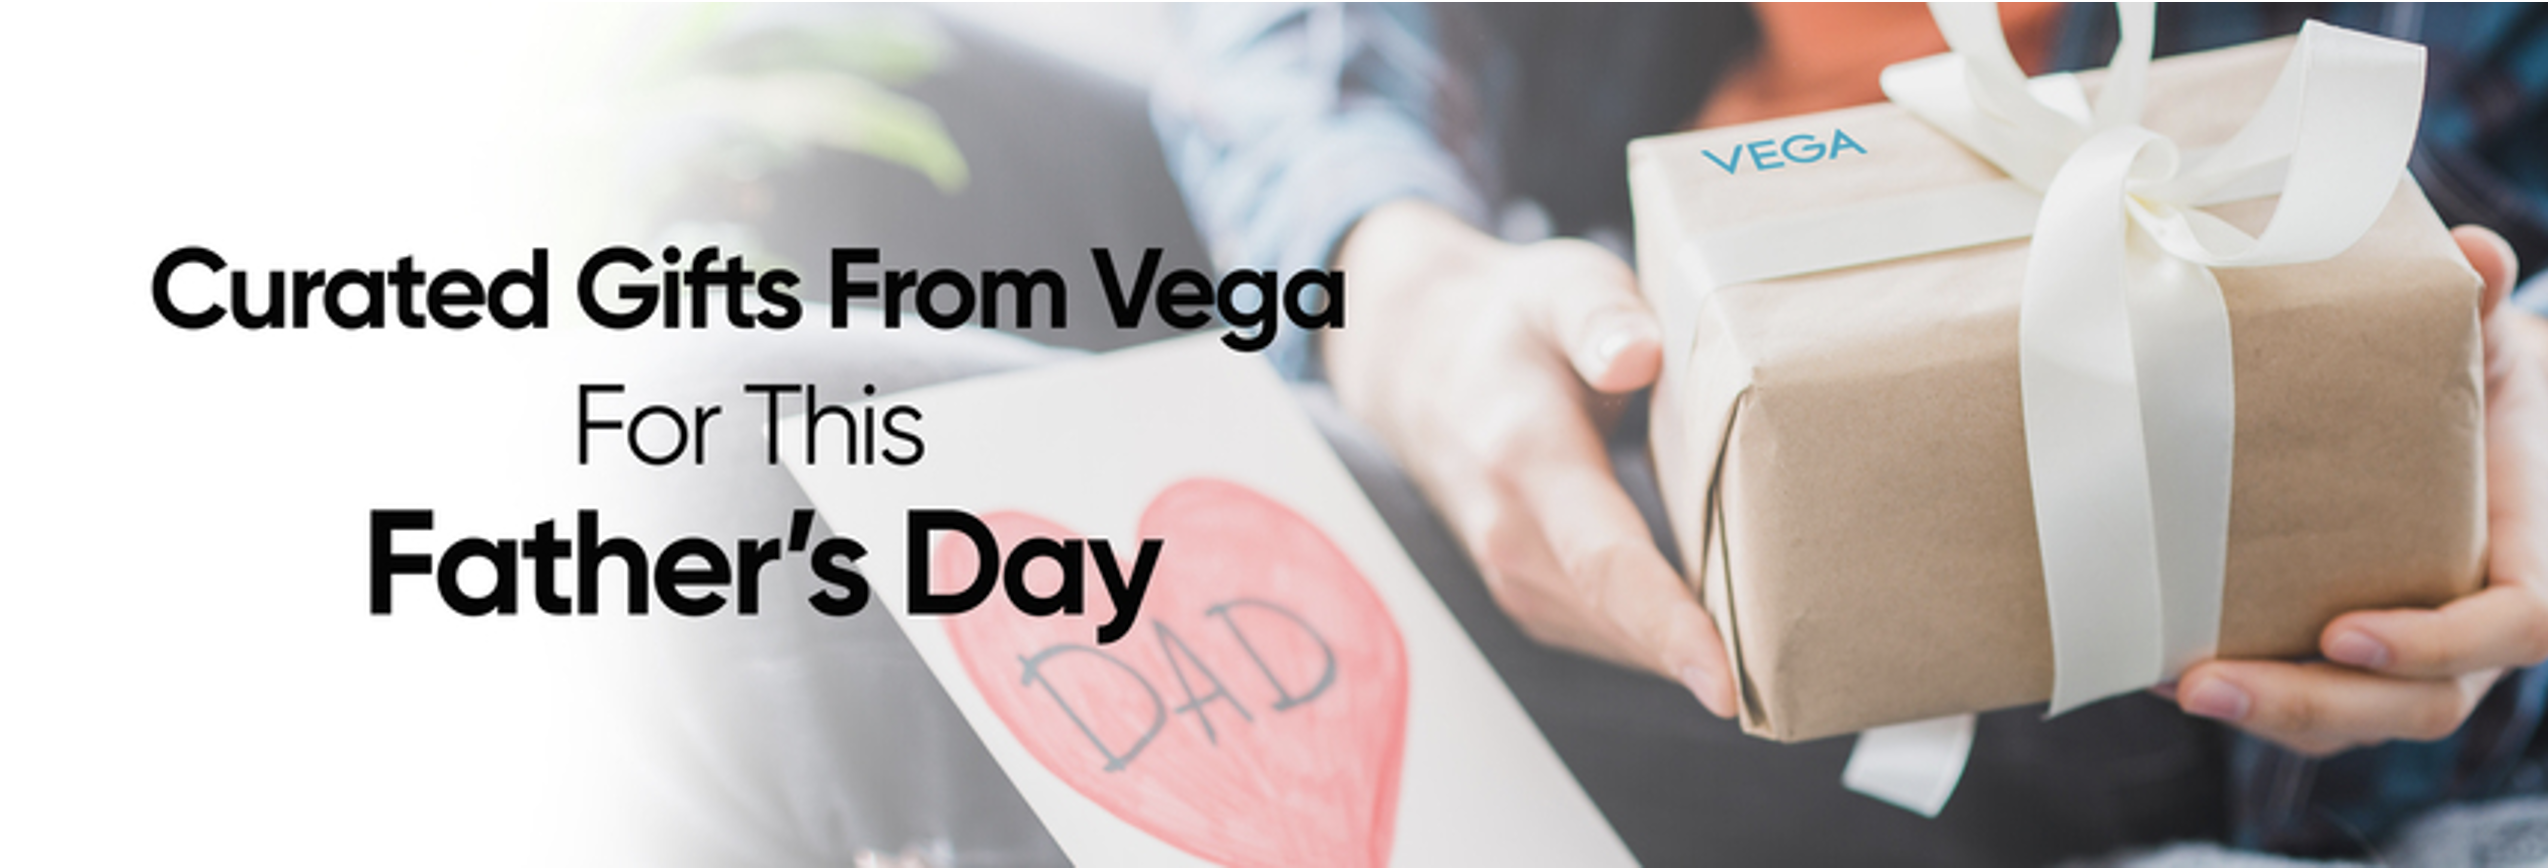 Make This Father’s Day Memorable With Curated Gifts From Vega